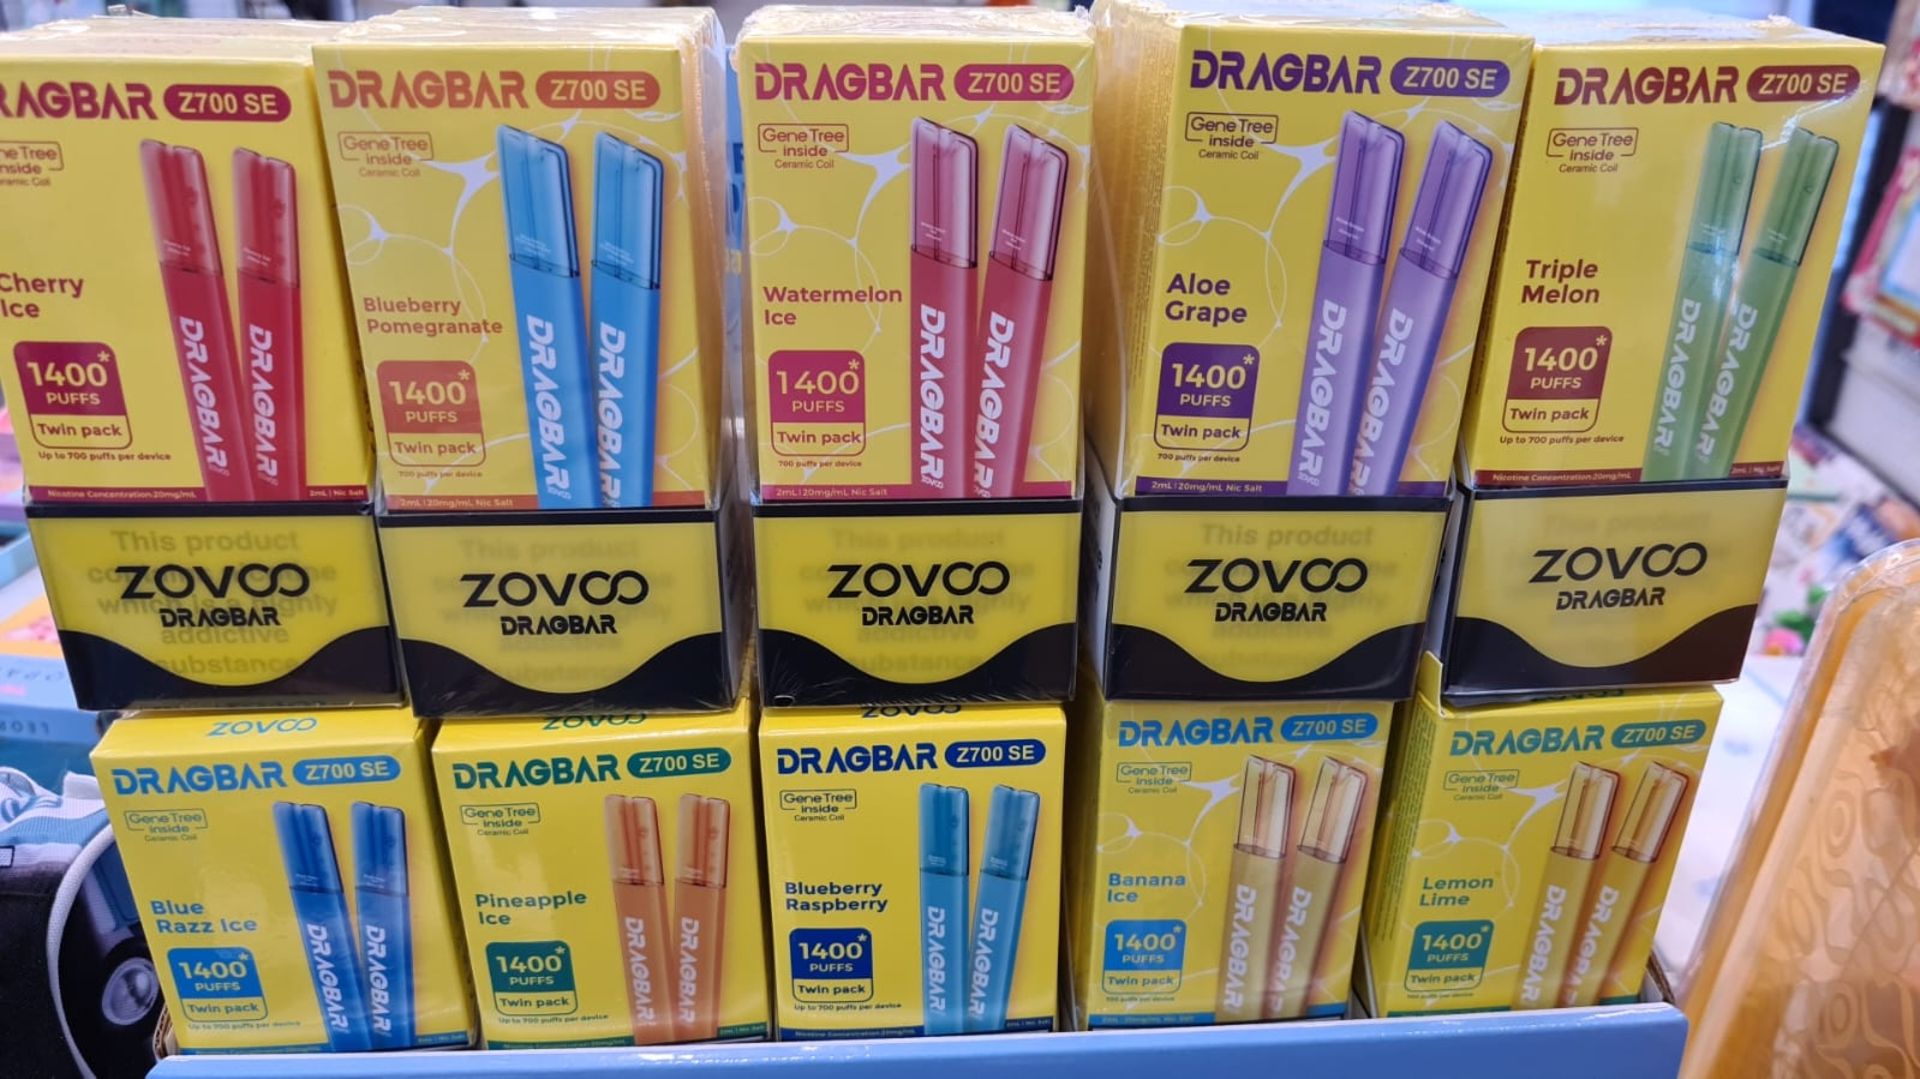 1000 x BRAND NEW DRAGBAR Z700 SE DISPOSABLE VAPES (500 PACKS) - 10 FLAVOURS INCLUDED - Image 2 of 5